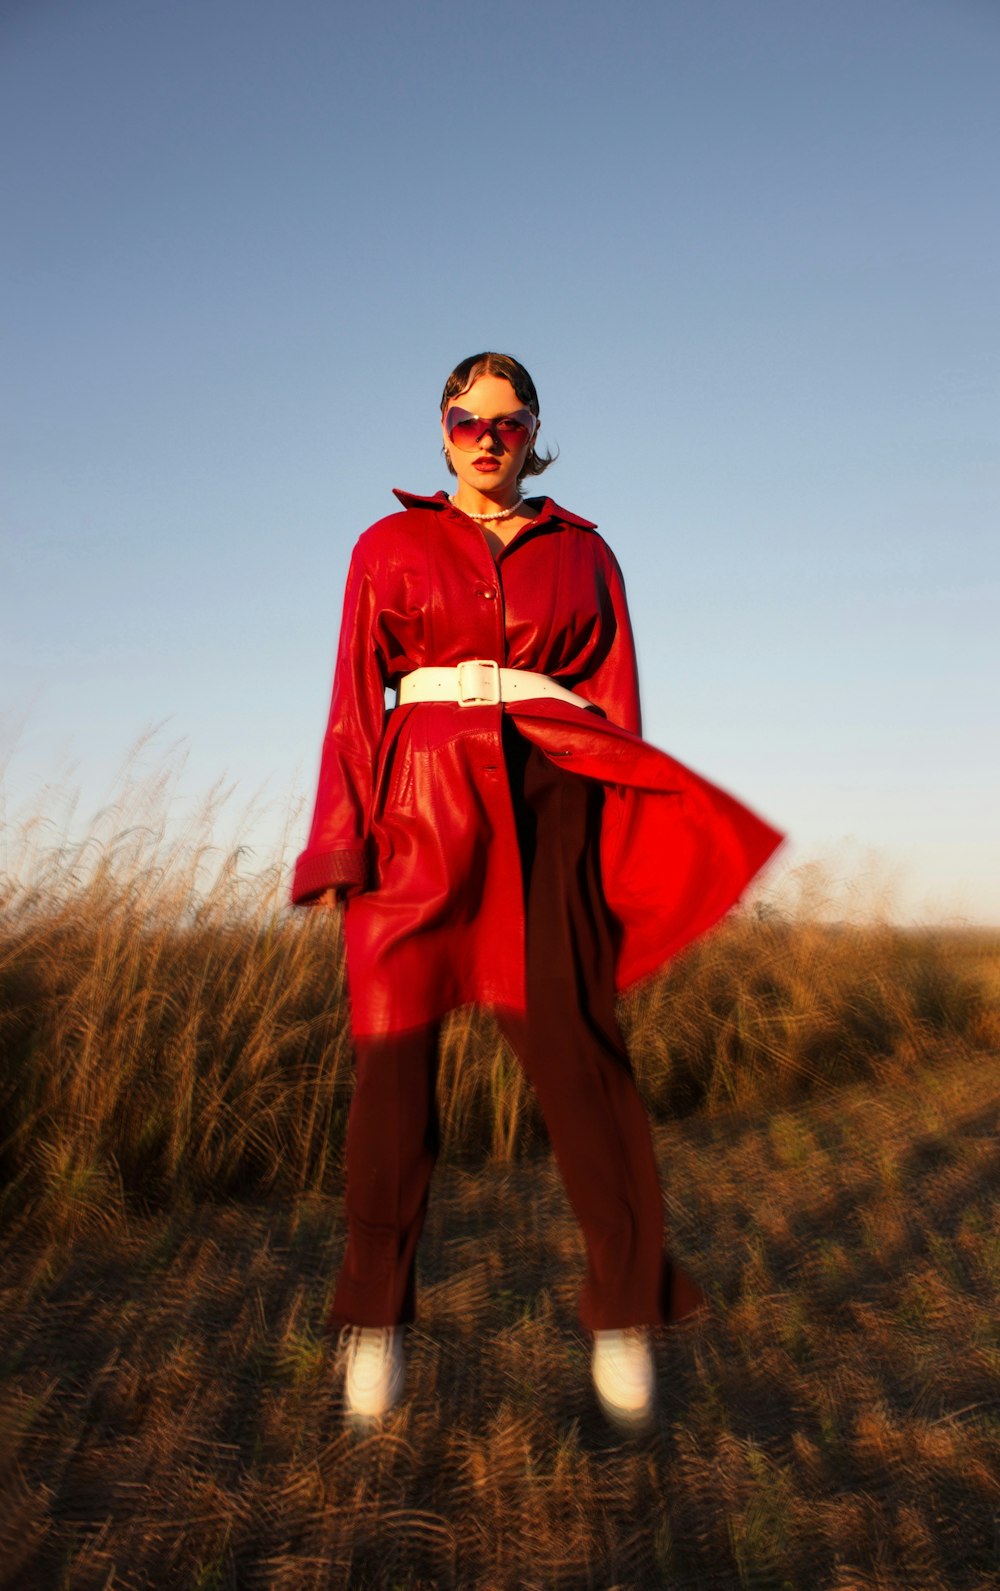 a man wearing a red suit and sunglasses standing in a grassy area